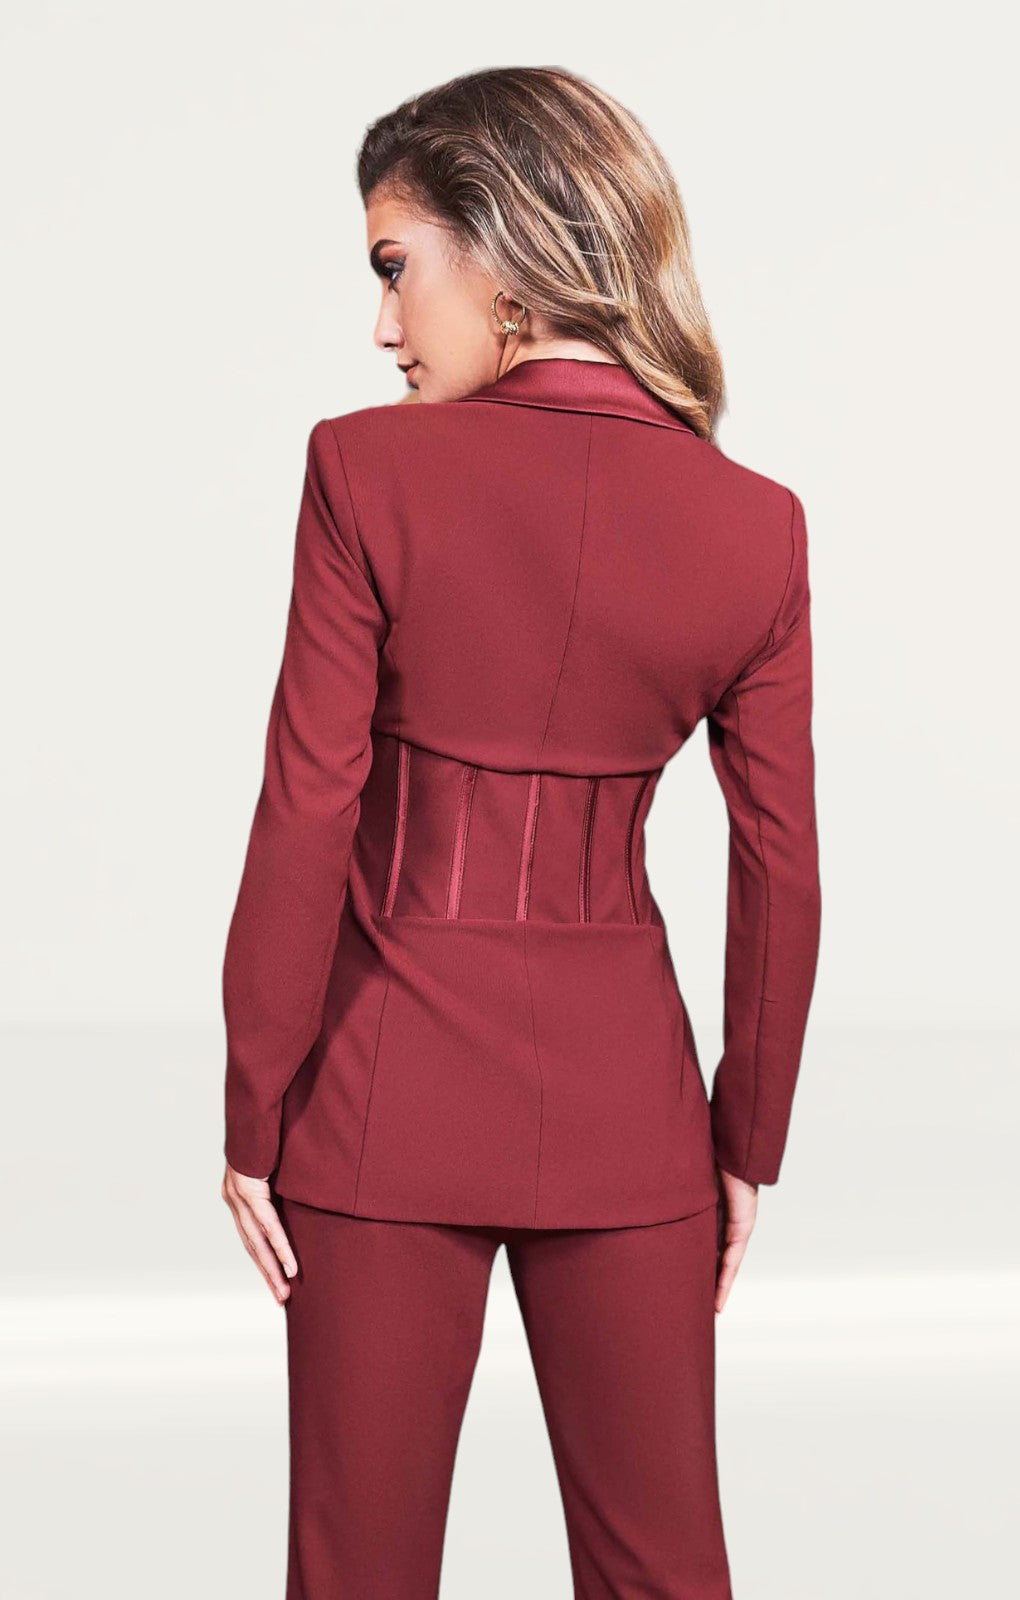 Rent Lavish Alice Burgundy Corset Style Tailored Jacket And Flare Trousers